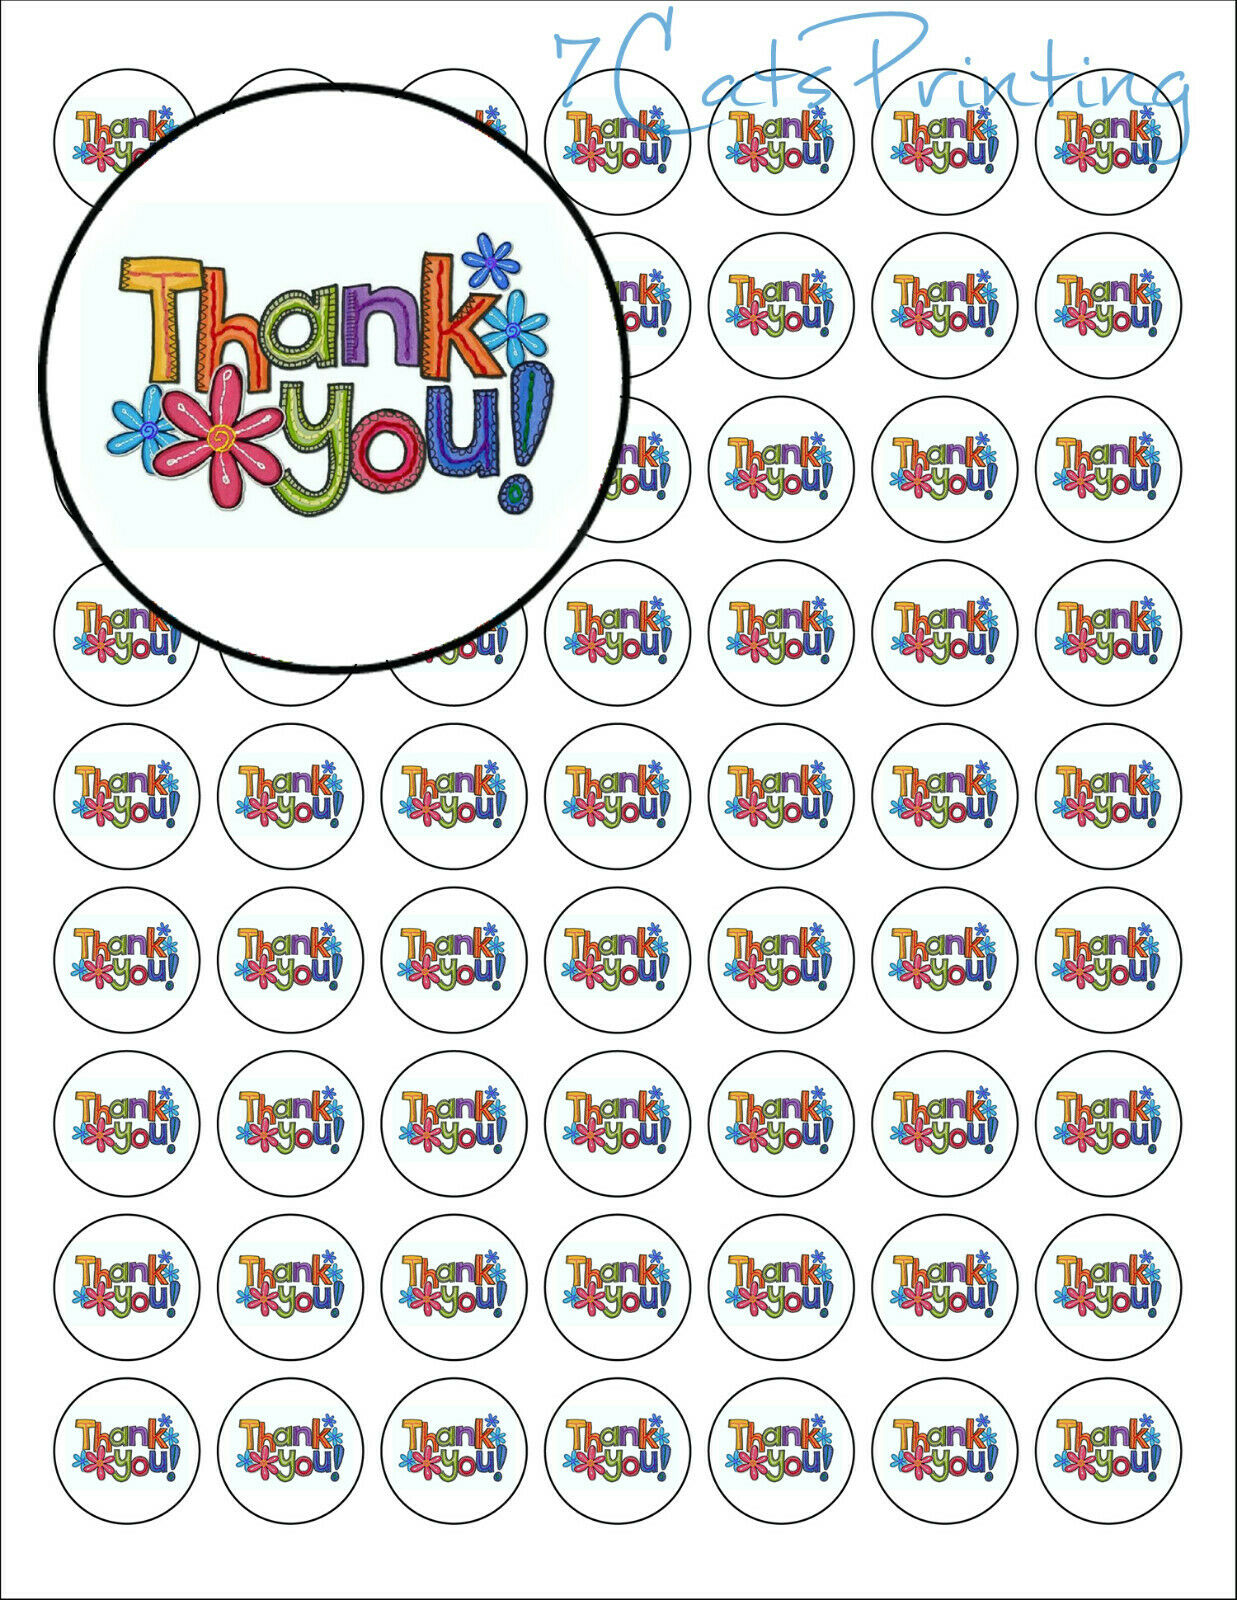 63 Thank You Envelope Seals With Flowers Labels Stickers 1" Round Circles